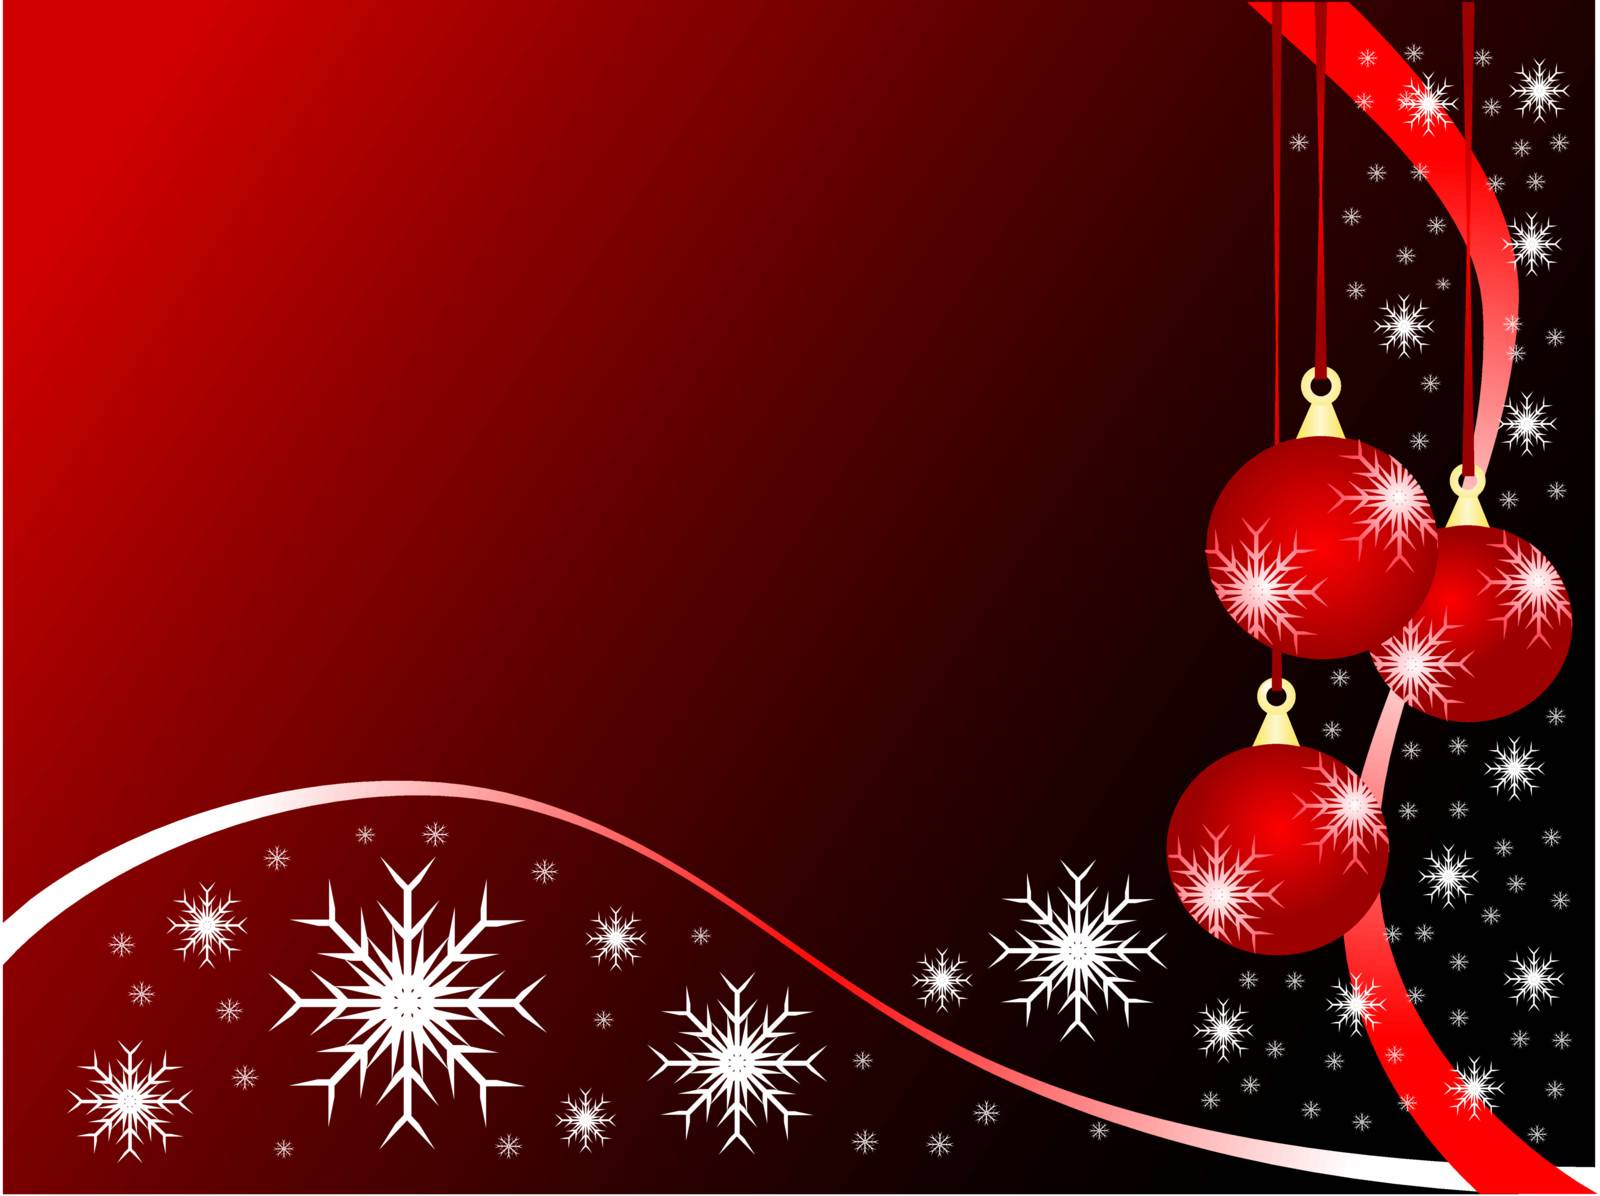 An abstract Christmas vector illustration with red baubles on a darker backdrop with white snowflakes and room for text